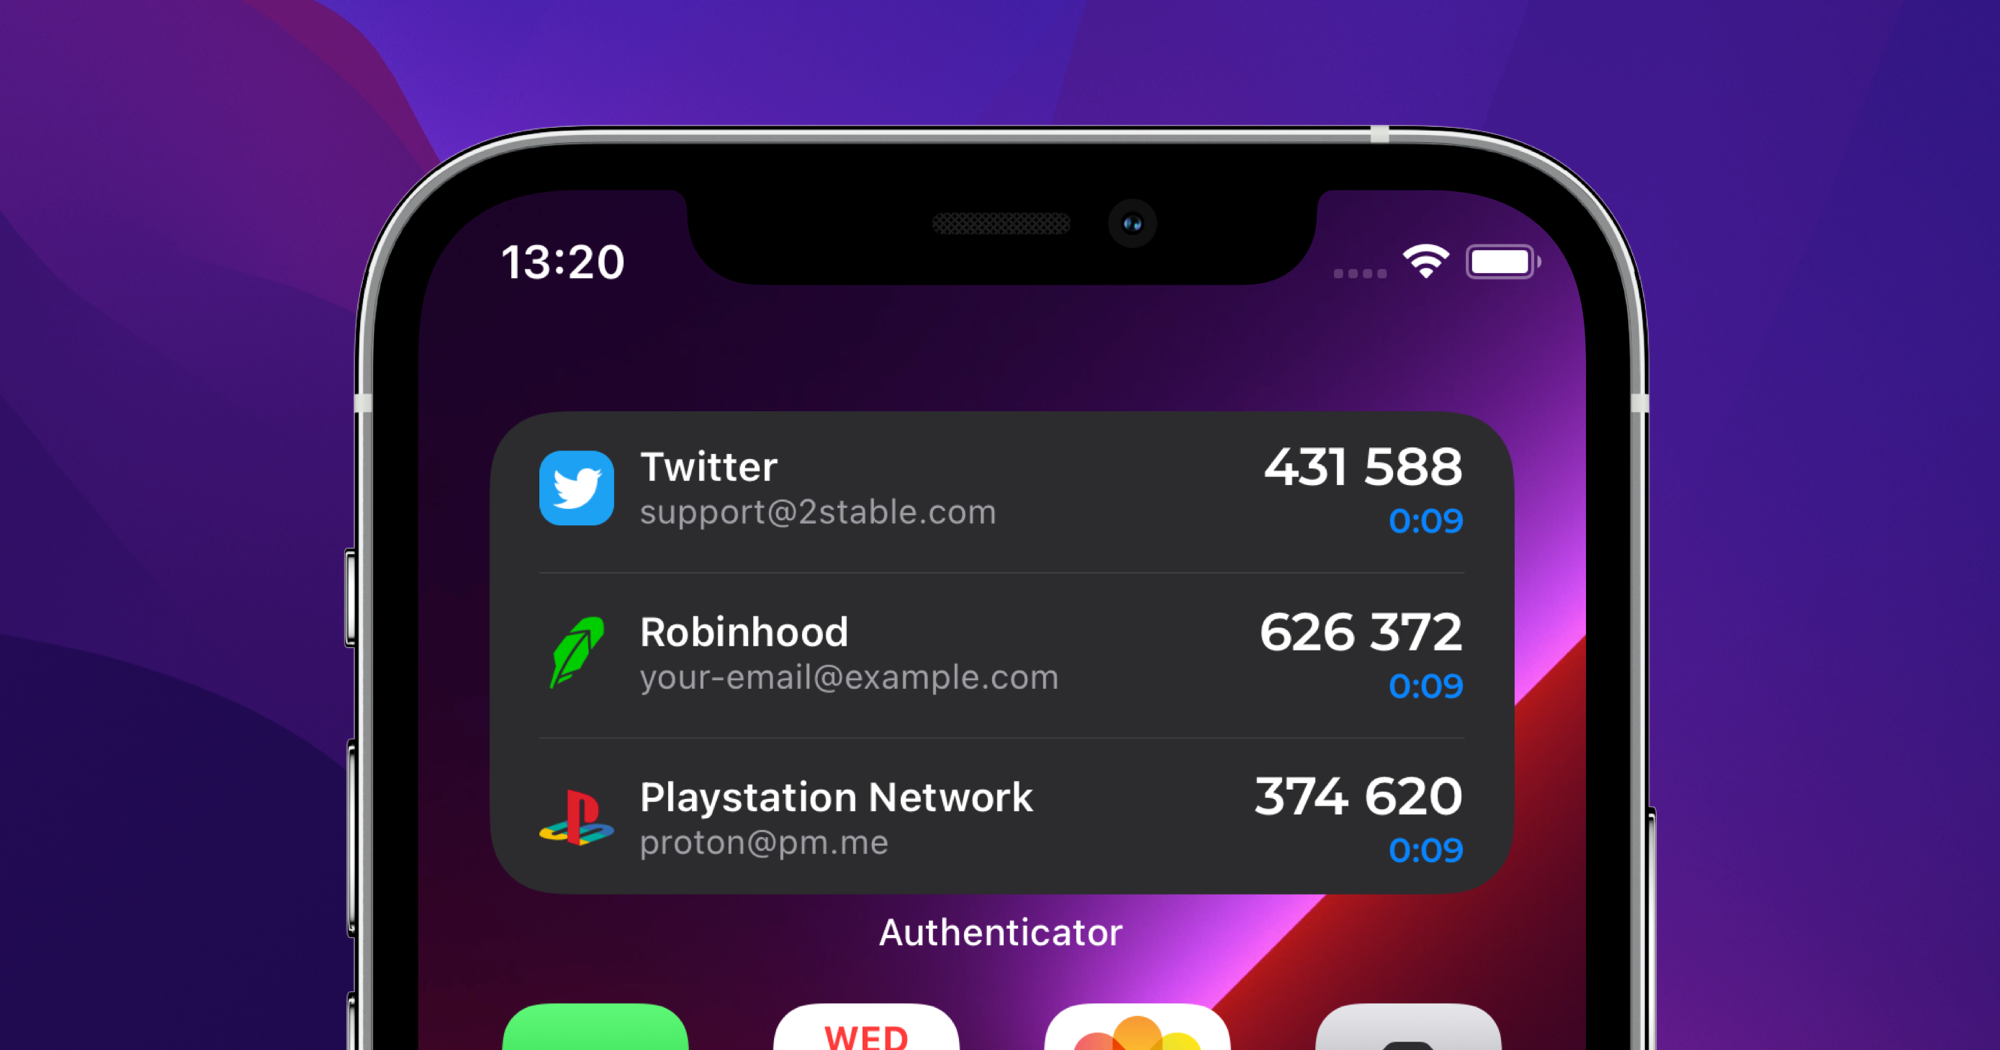 How to add Authenticator widget on your Home Screen